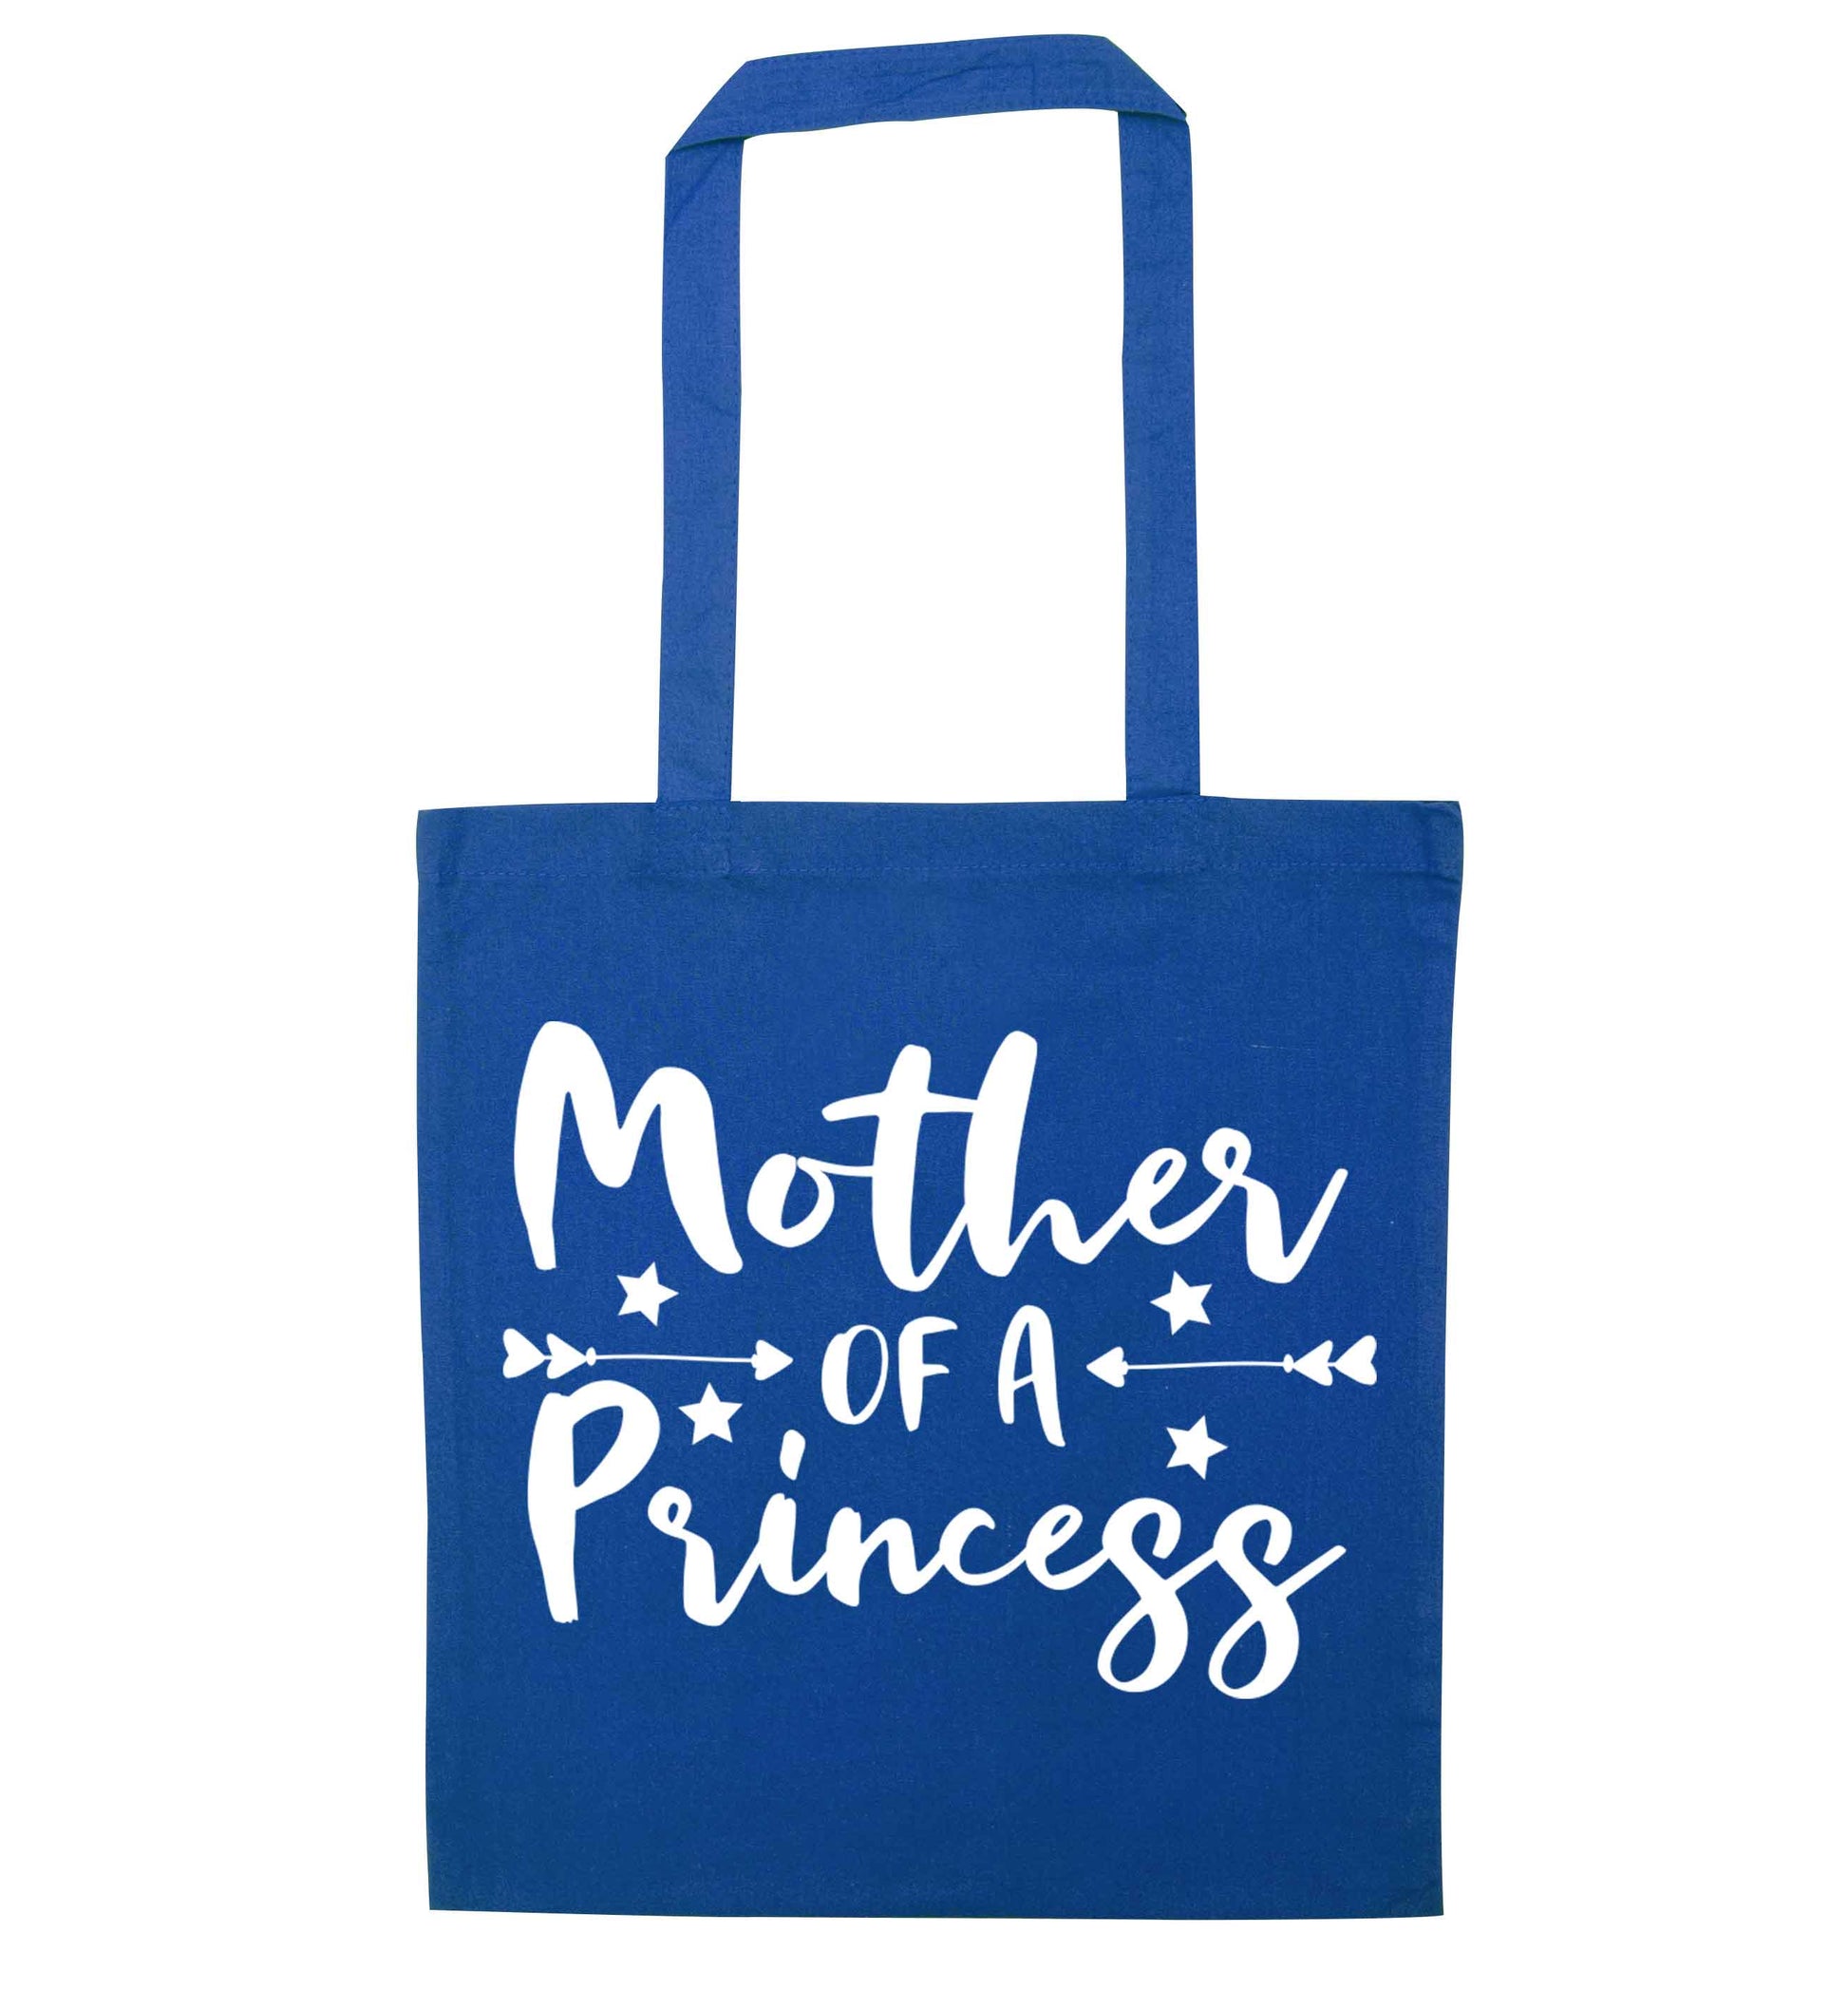 Mother of a princess blue tote bag